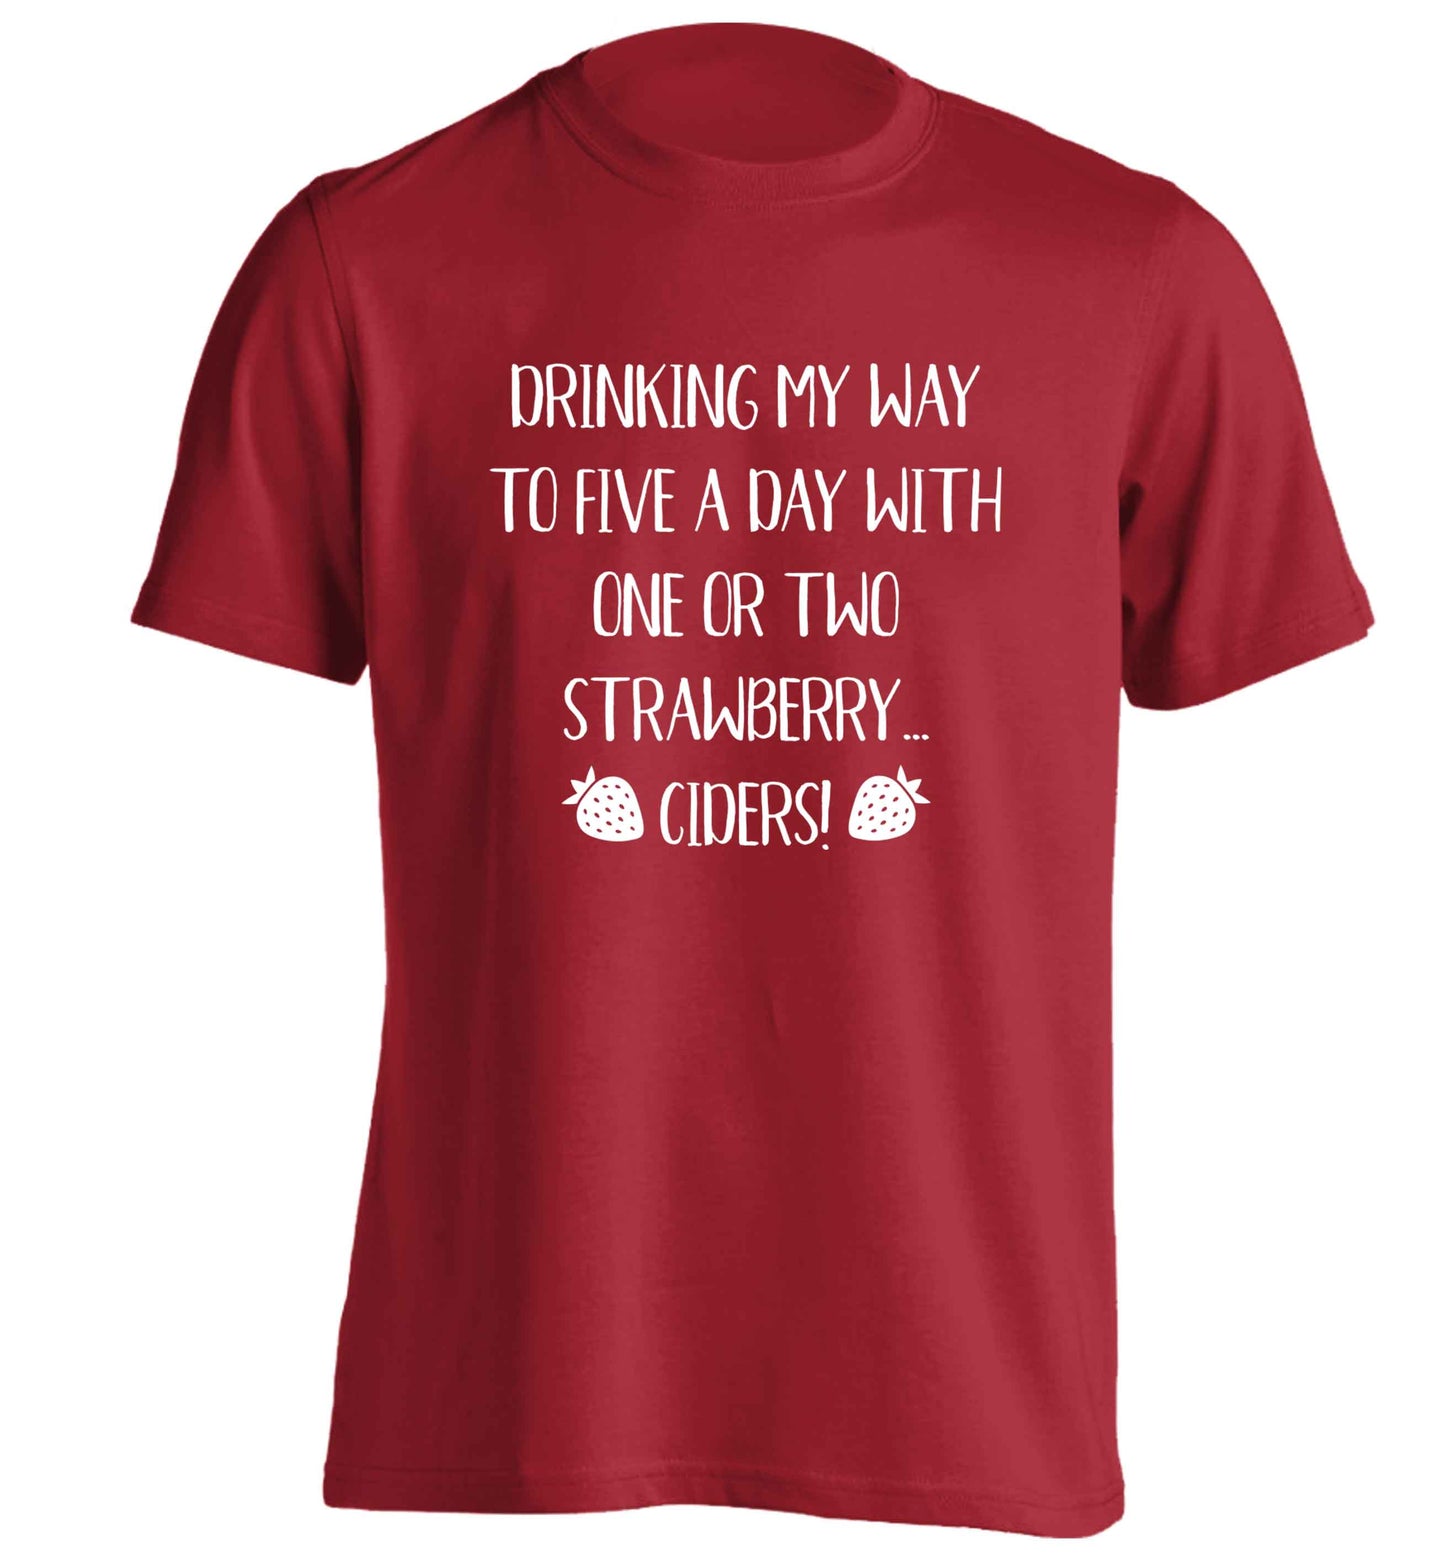 Drinking my way to five a day with one or two strawberry ciders adults unisex red Tshirt 2XL